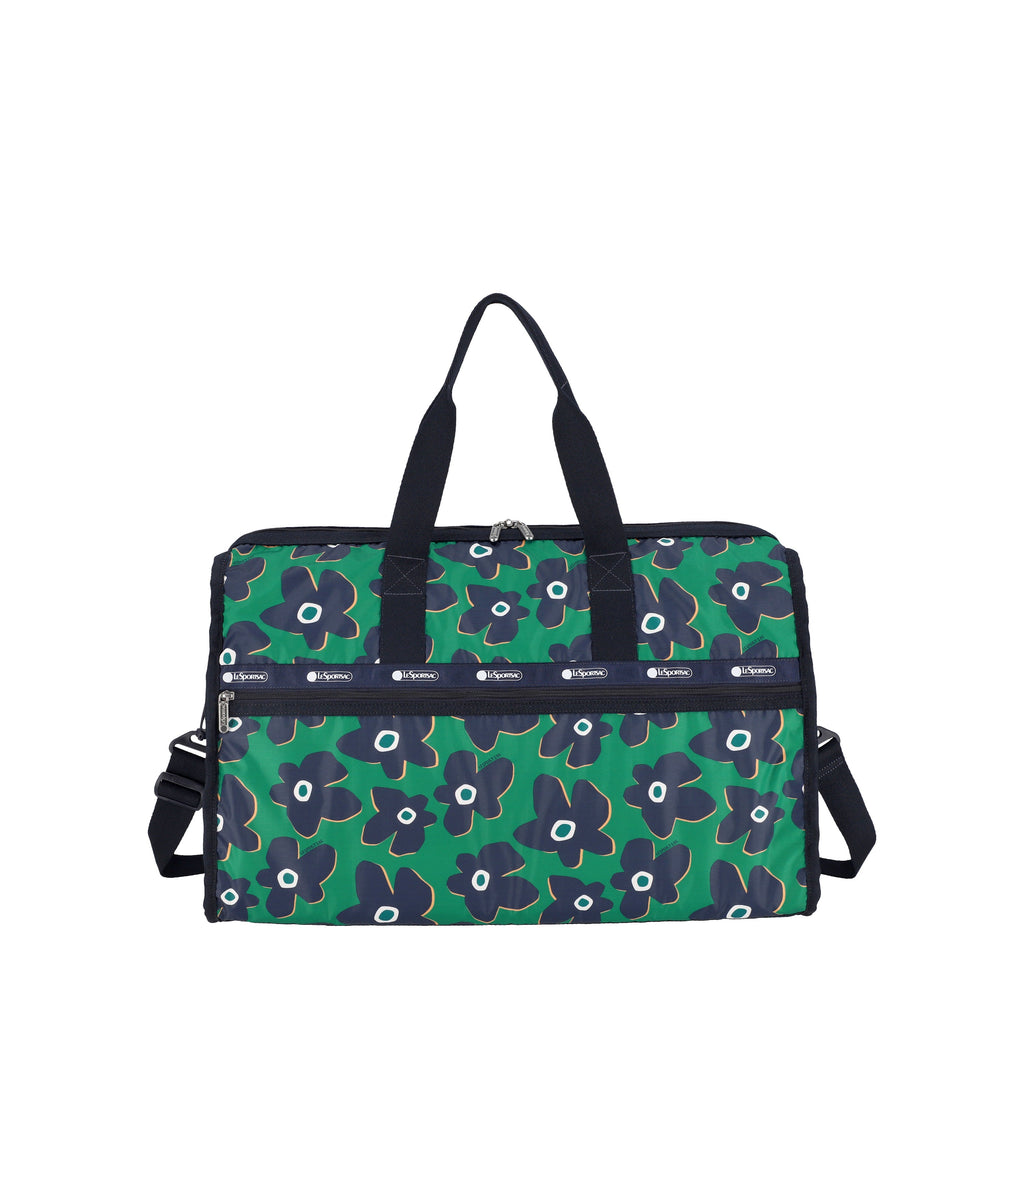 Deluxe Large Weekender - Cutout Floral print – LeSportsac